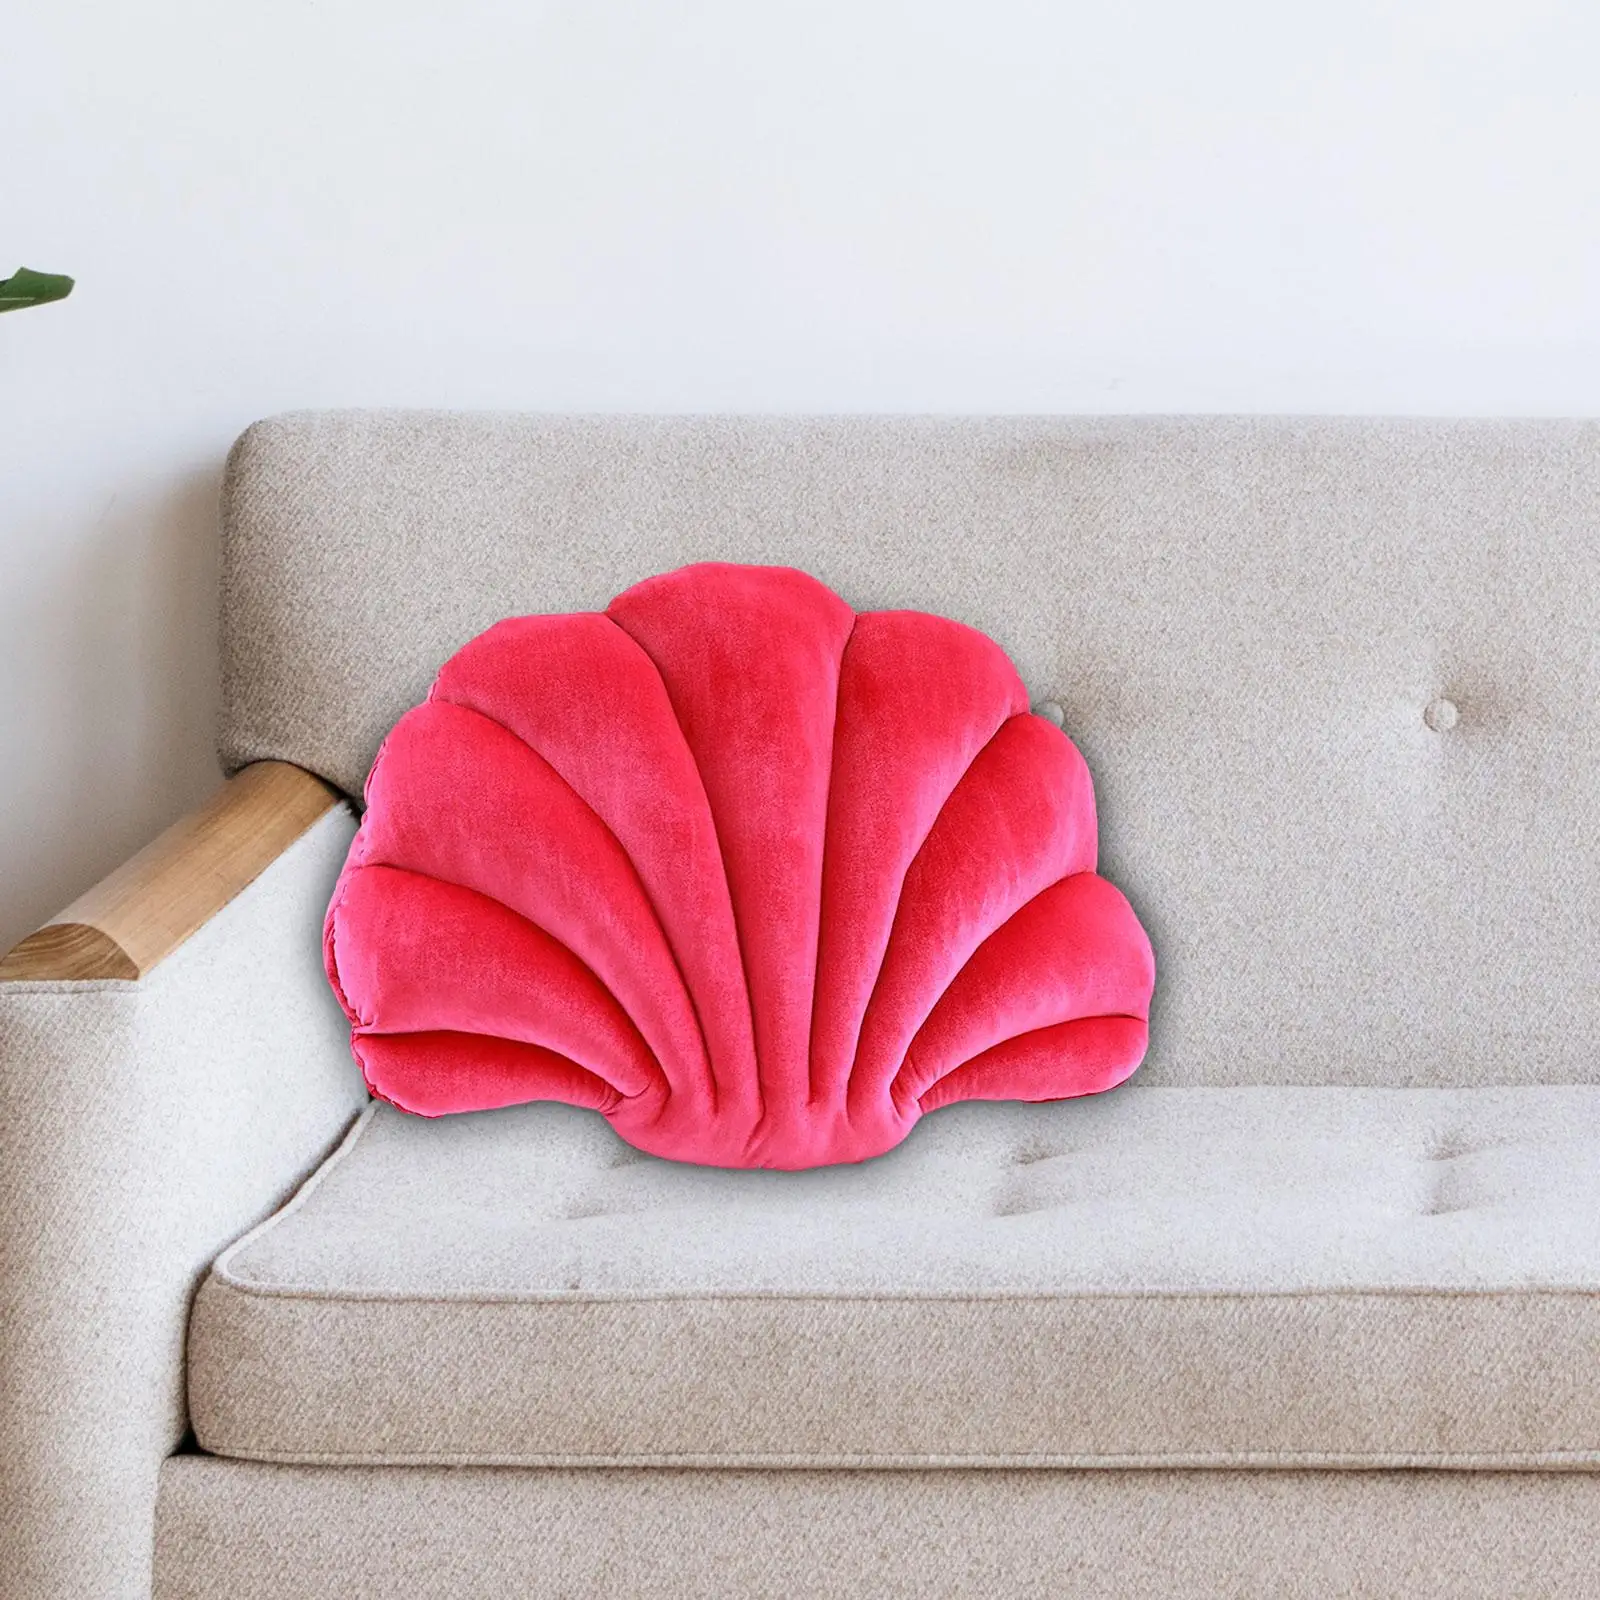 Seashell Decorative Pillow shell Pillow Cute Throw Pillow Ornament Wear Resistant for Couch Bed Size 34cmx25cm Firm Stuffed